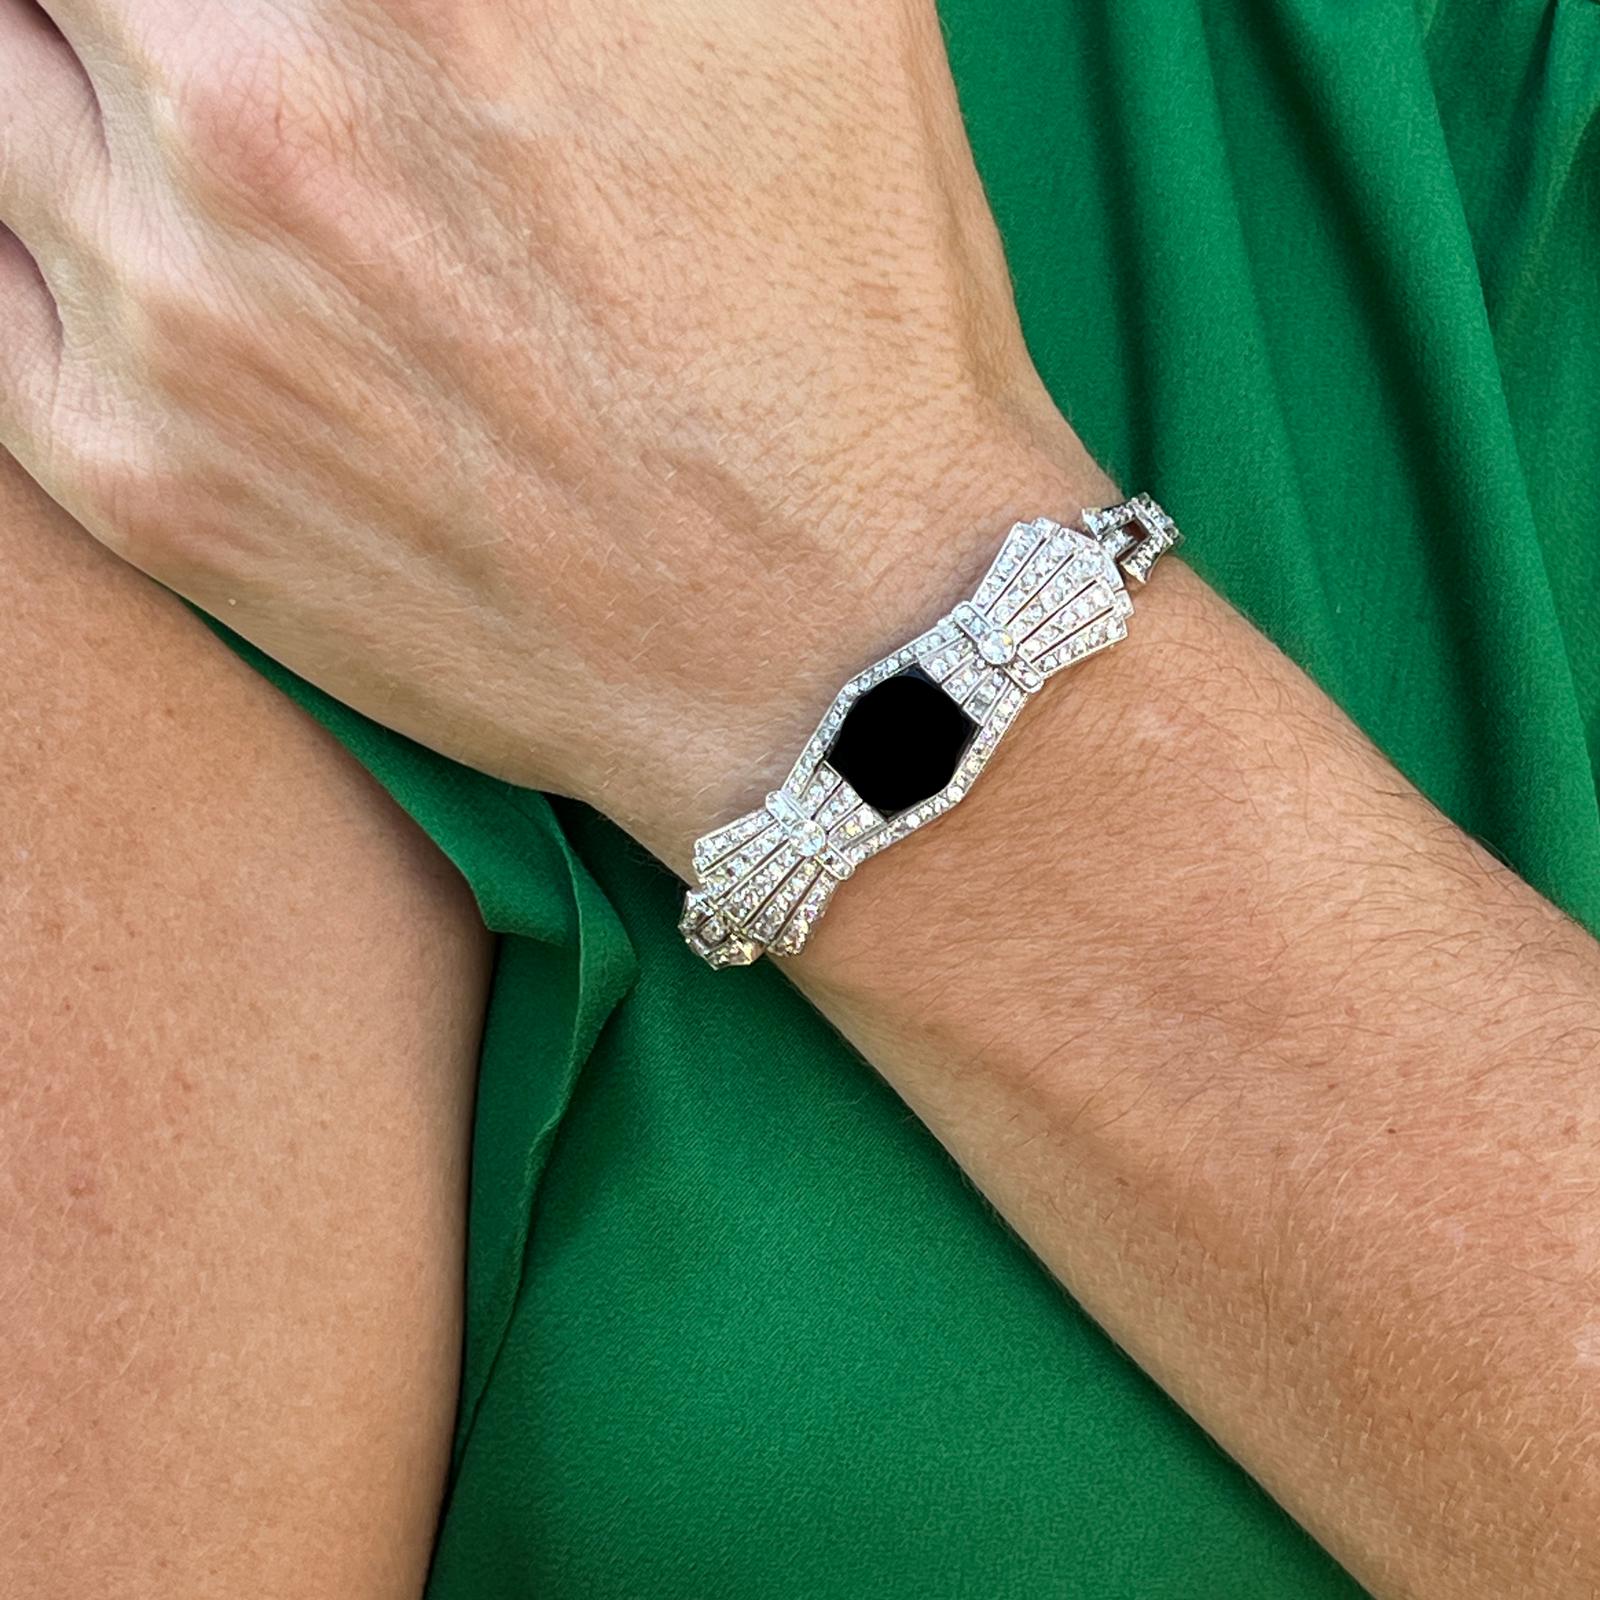 1940's diamond and onyx bracelet handcrafted in platinum. The bracelet features 136 round brilliant, old european, and single cut diamonds weighing approximately 3.00 carat total weight. The diamonds are graded H-I color and SI clarity. The bracelet